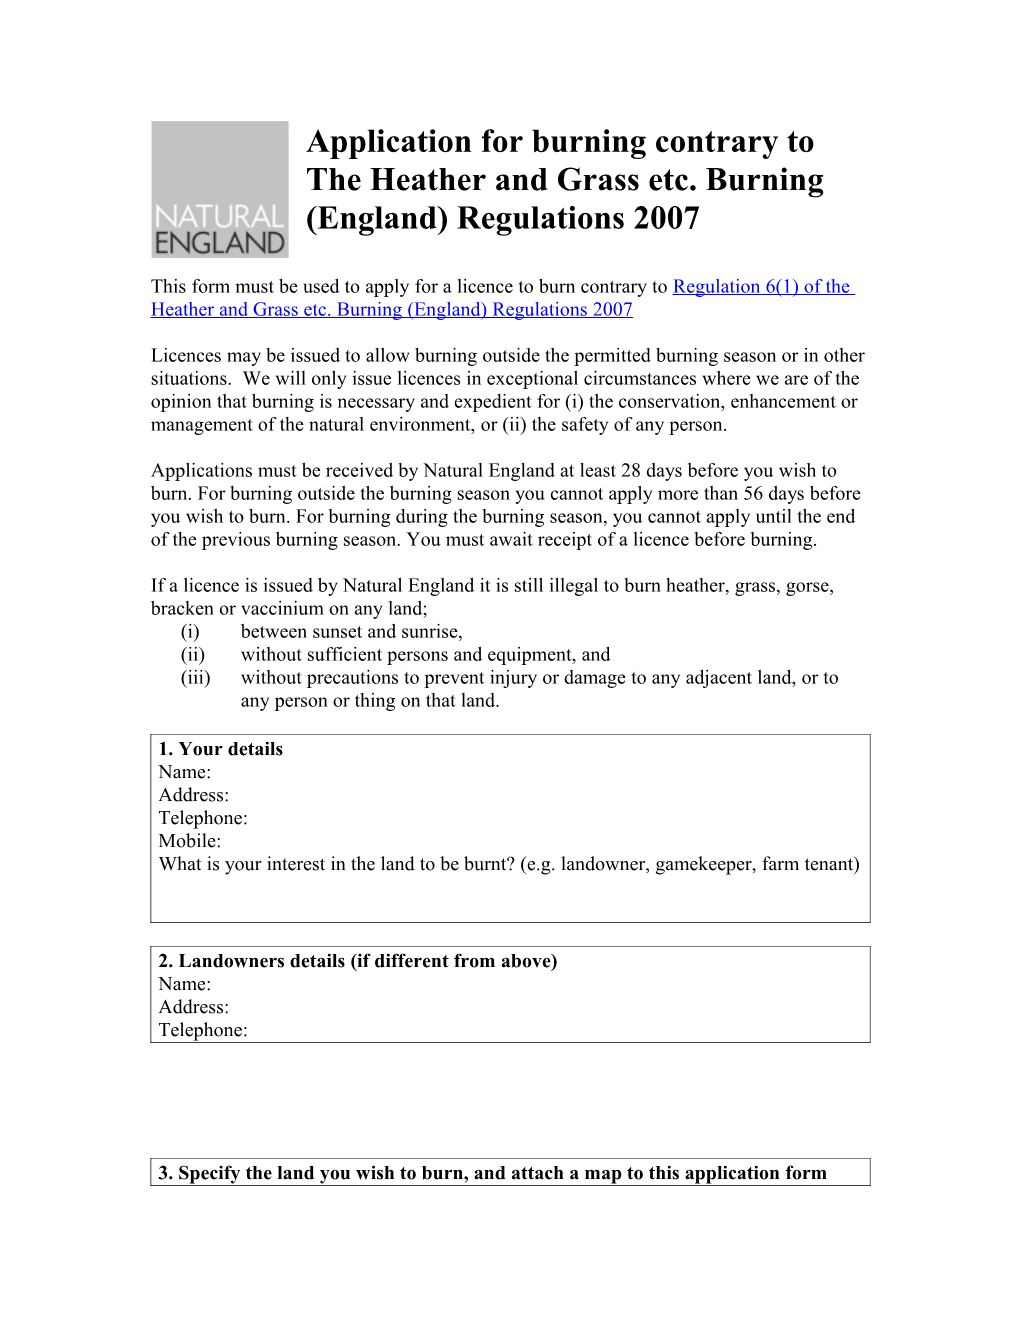 Application for Burning Contrary to the Heather and Grass Etc. Burning (England) Regulations